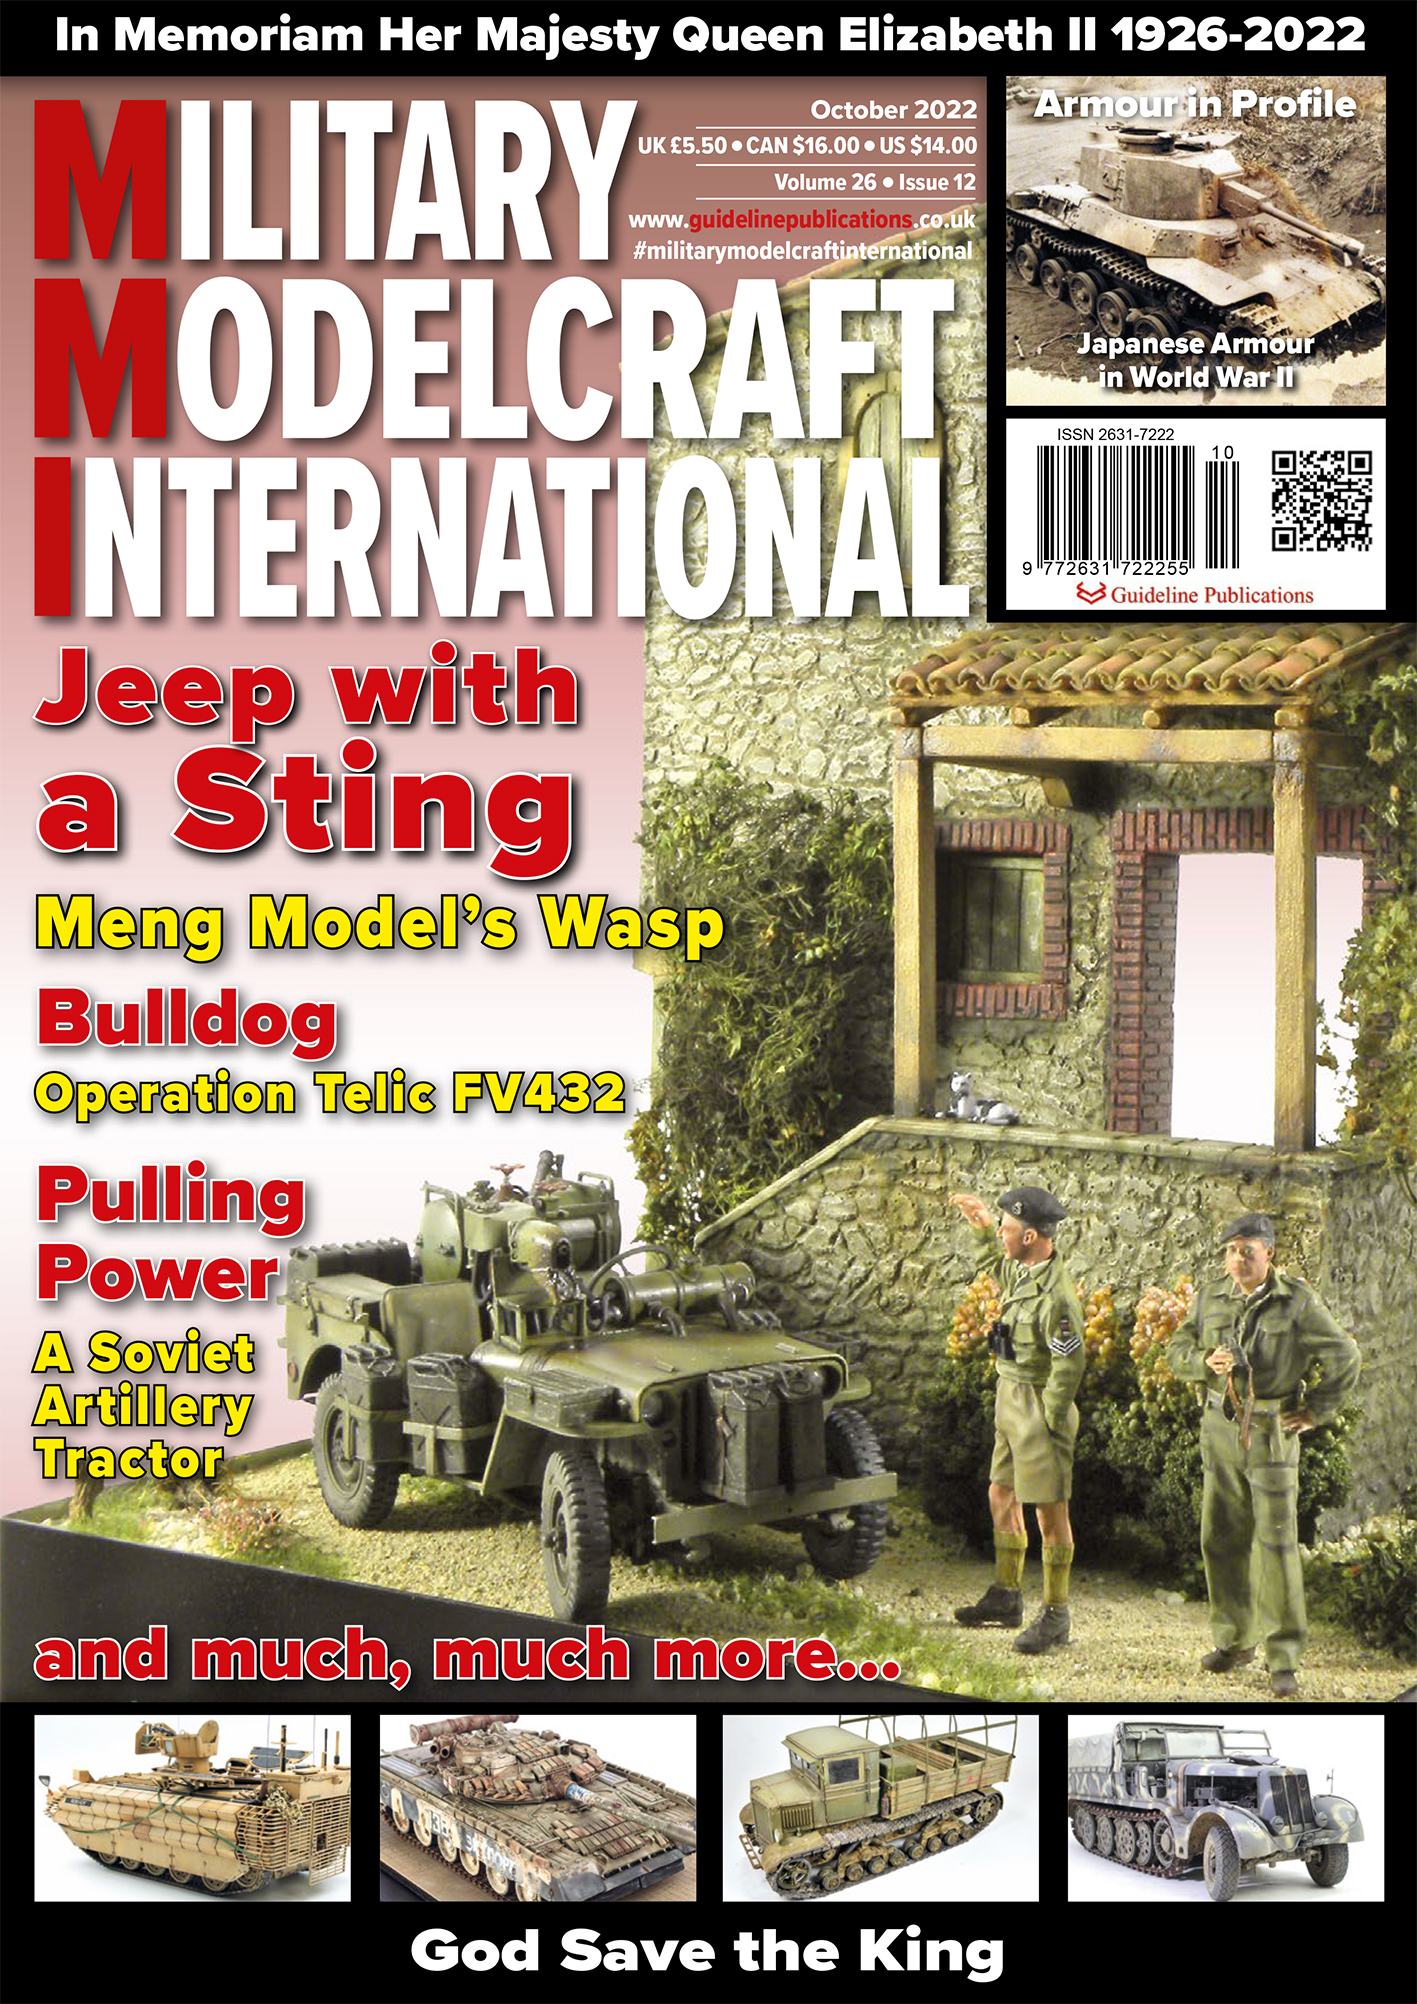 Guideline Publications Ltd Military Modelcraft Int Oct 22 October 2022 